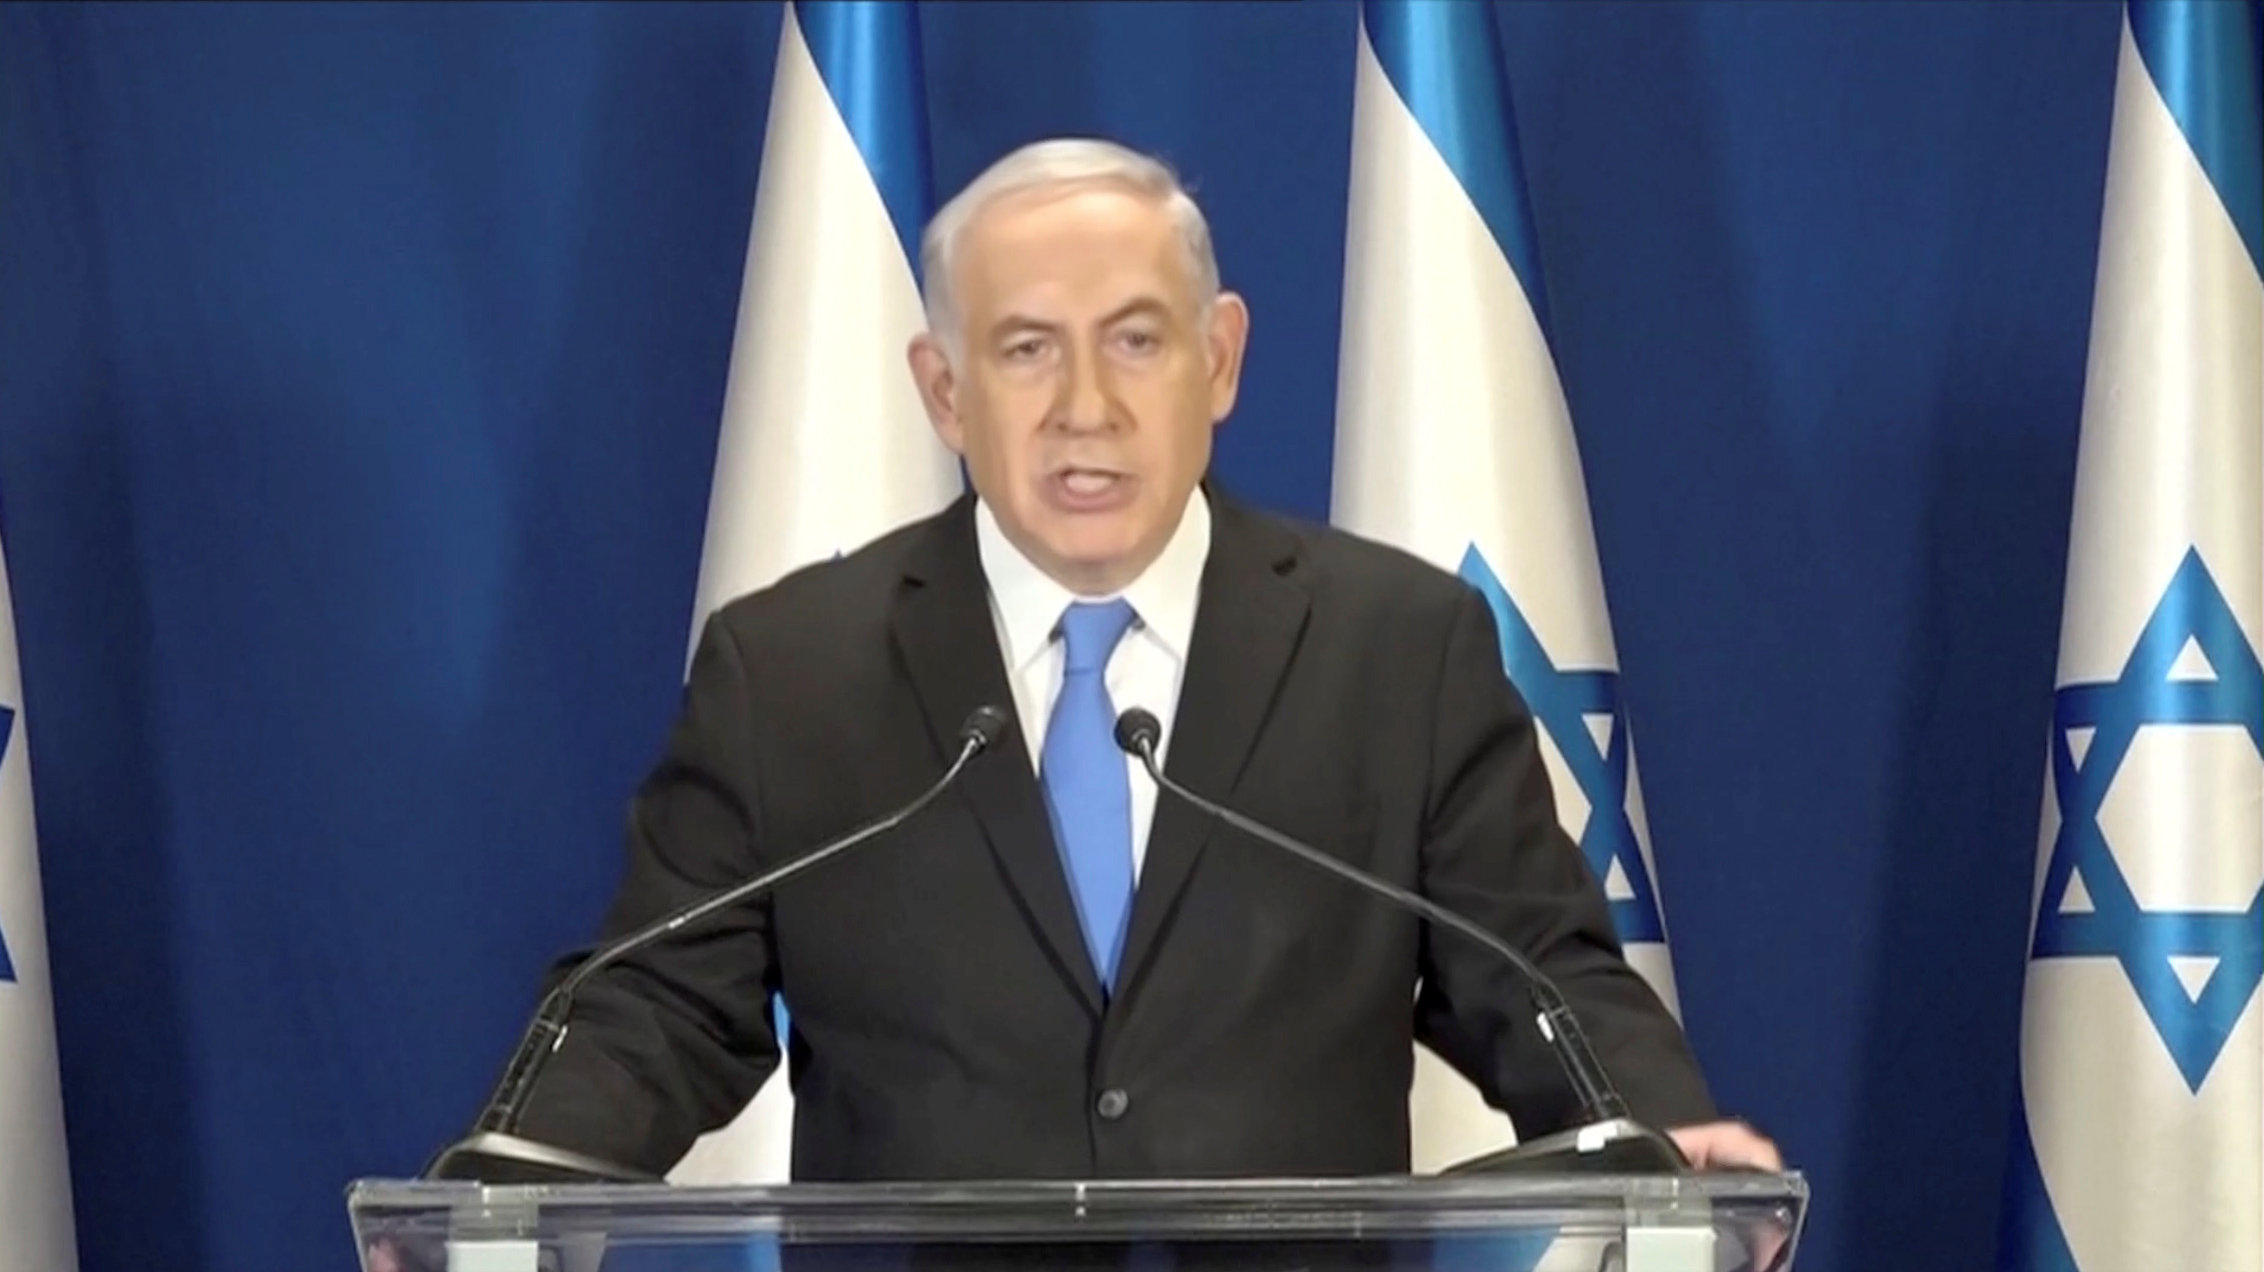 Israeli Prime Minister Benjamin Netanyahu to be indicted for corruption